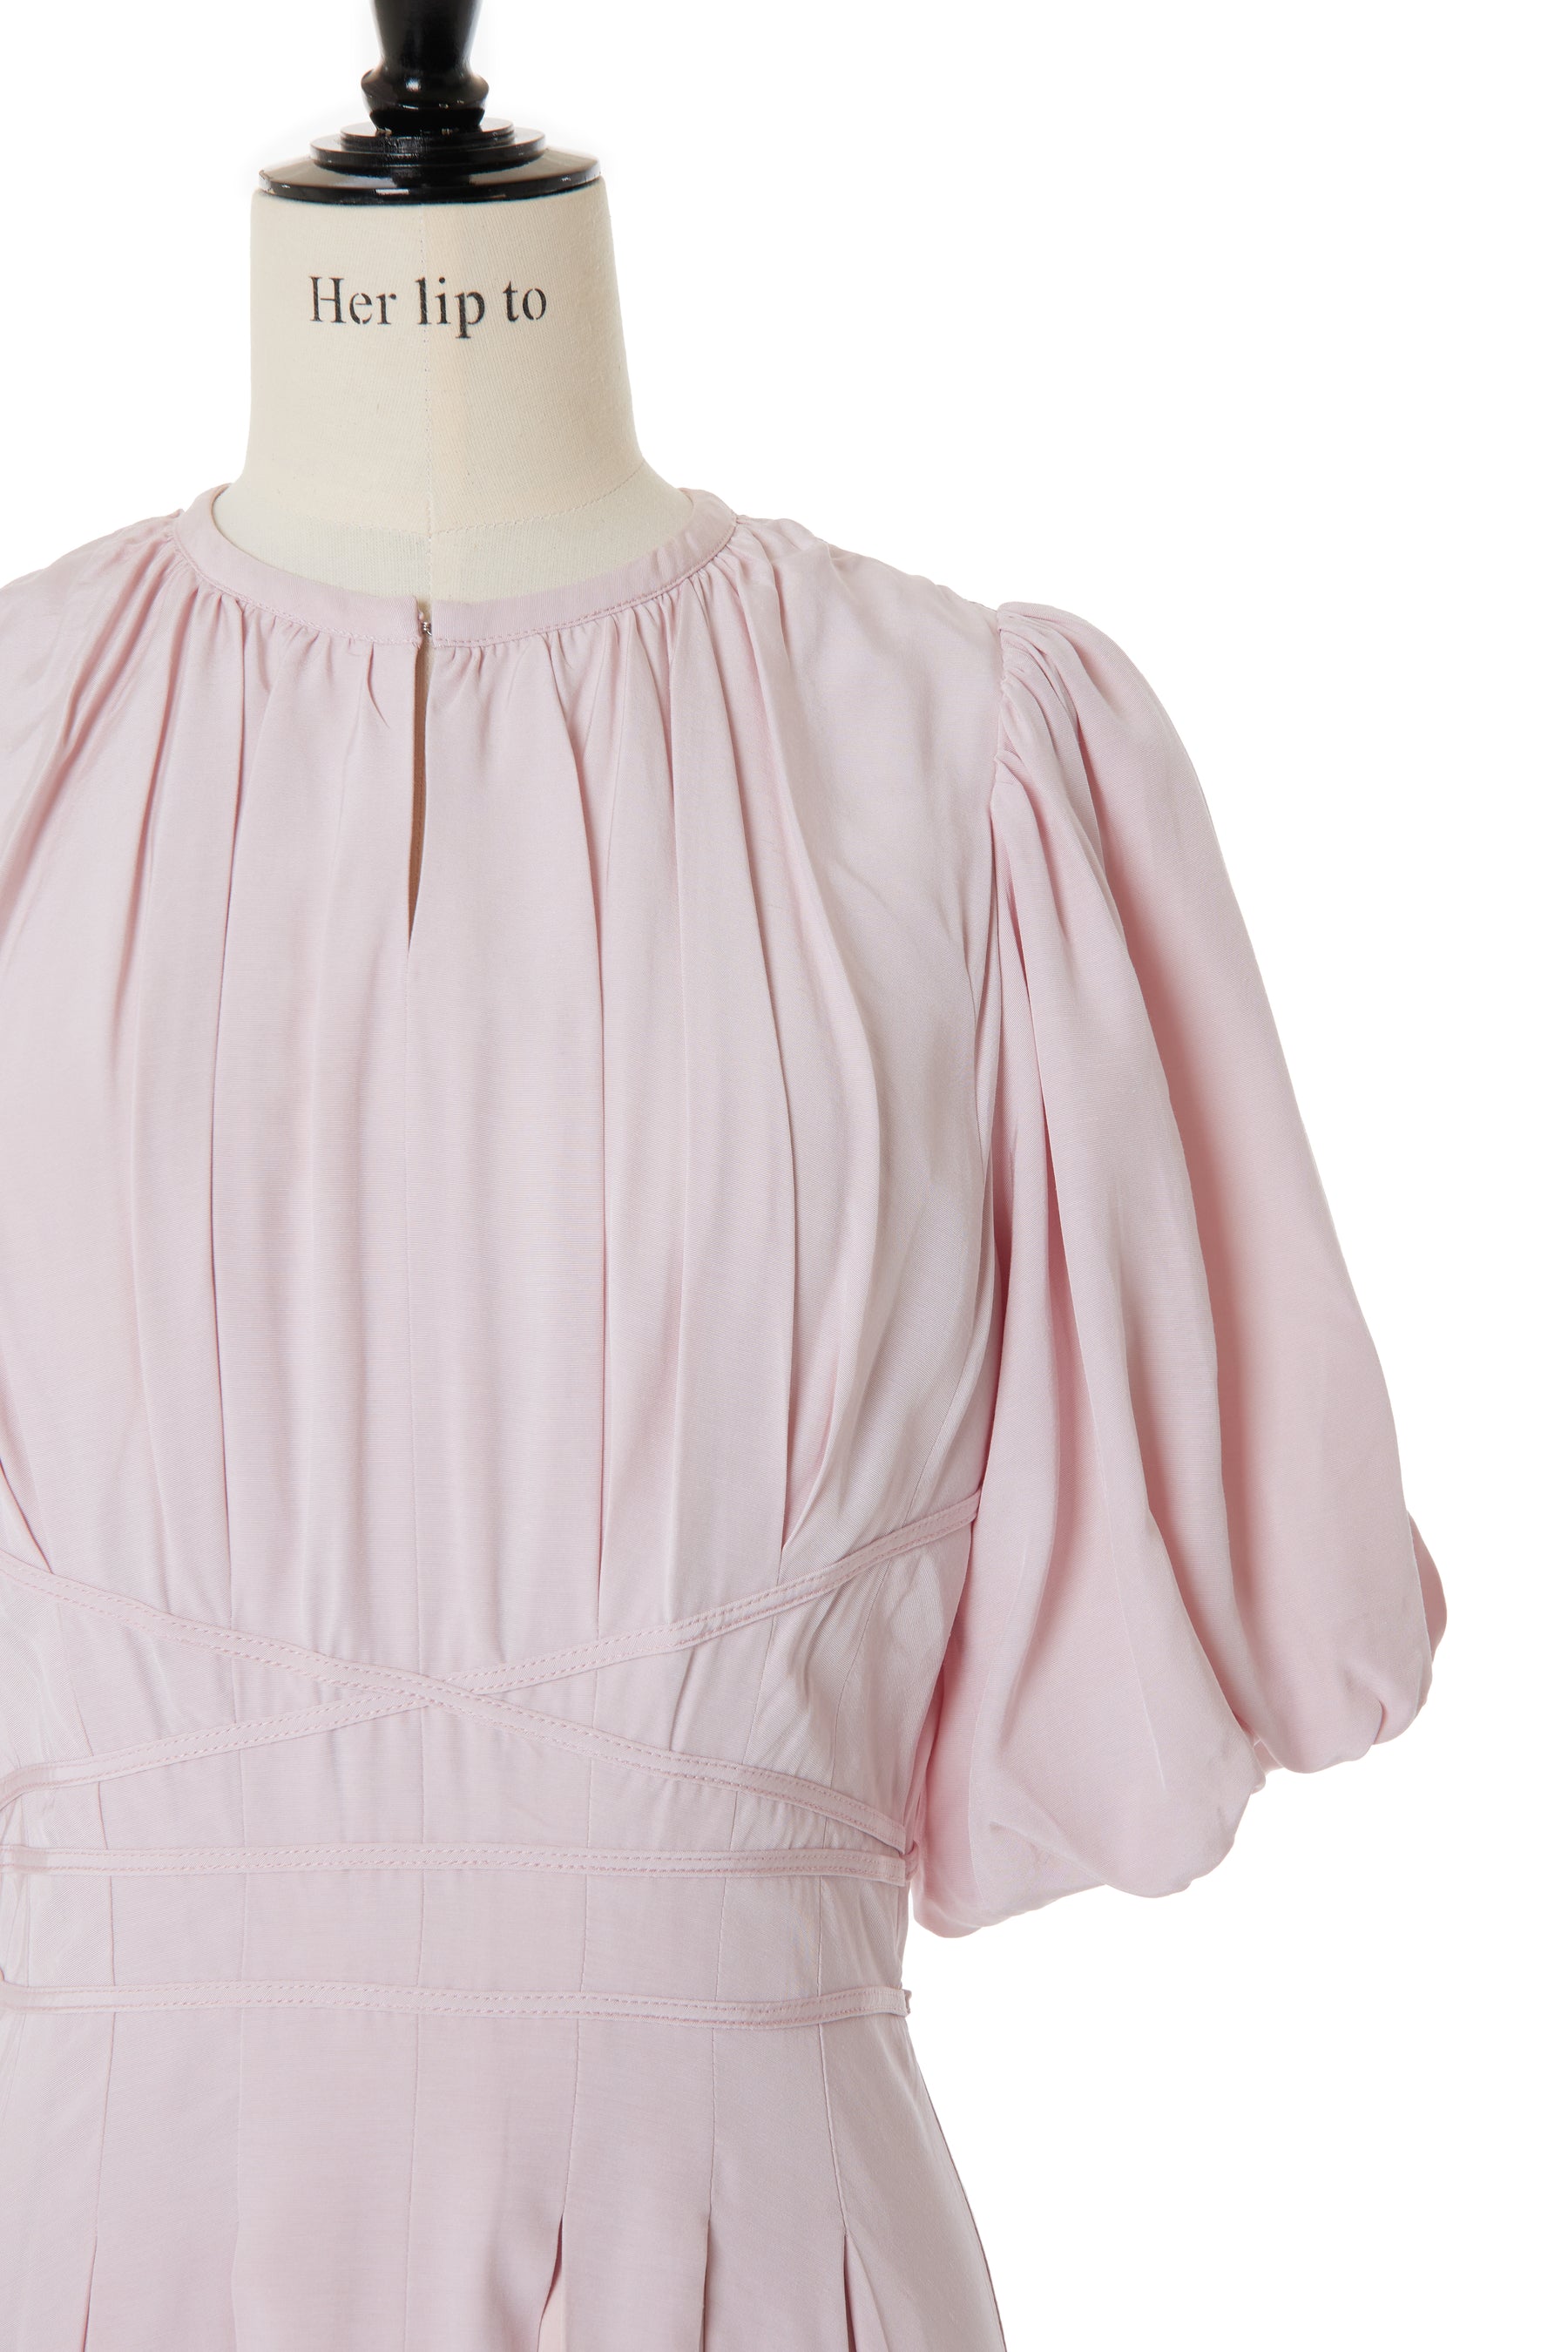 【sakura pink】【5月上旬発送】Fountain Lace Up Bow Dress